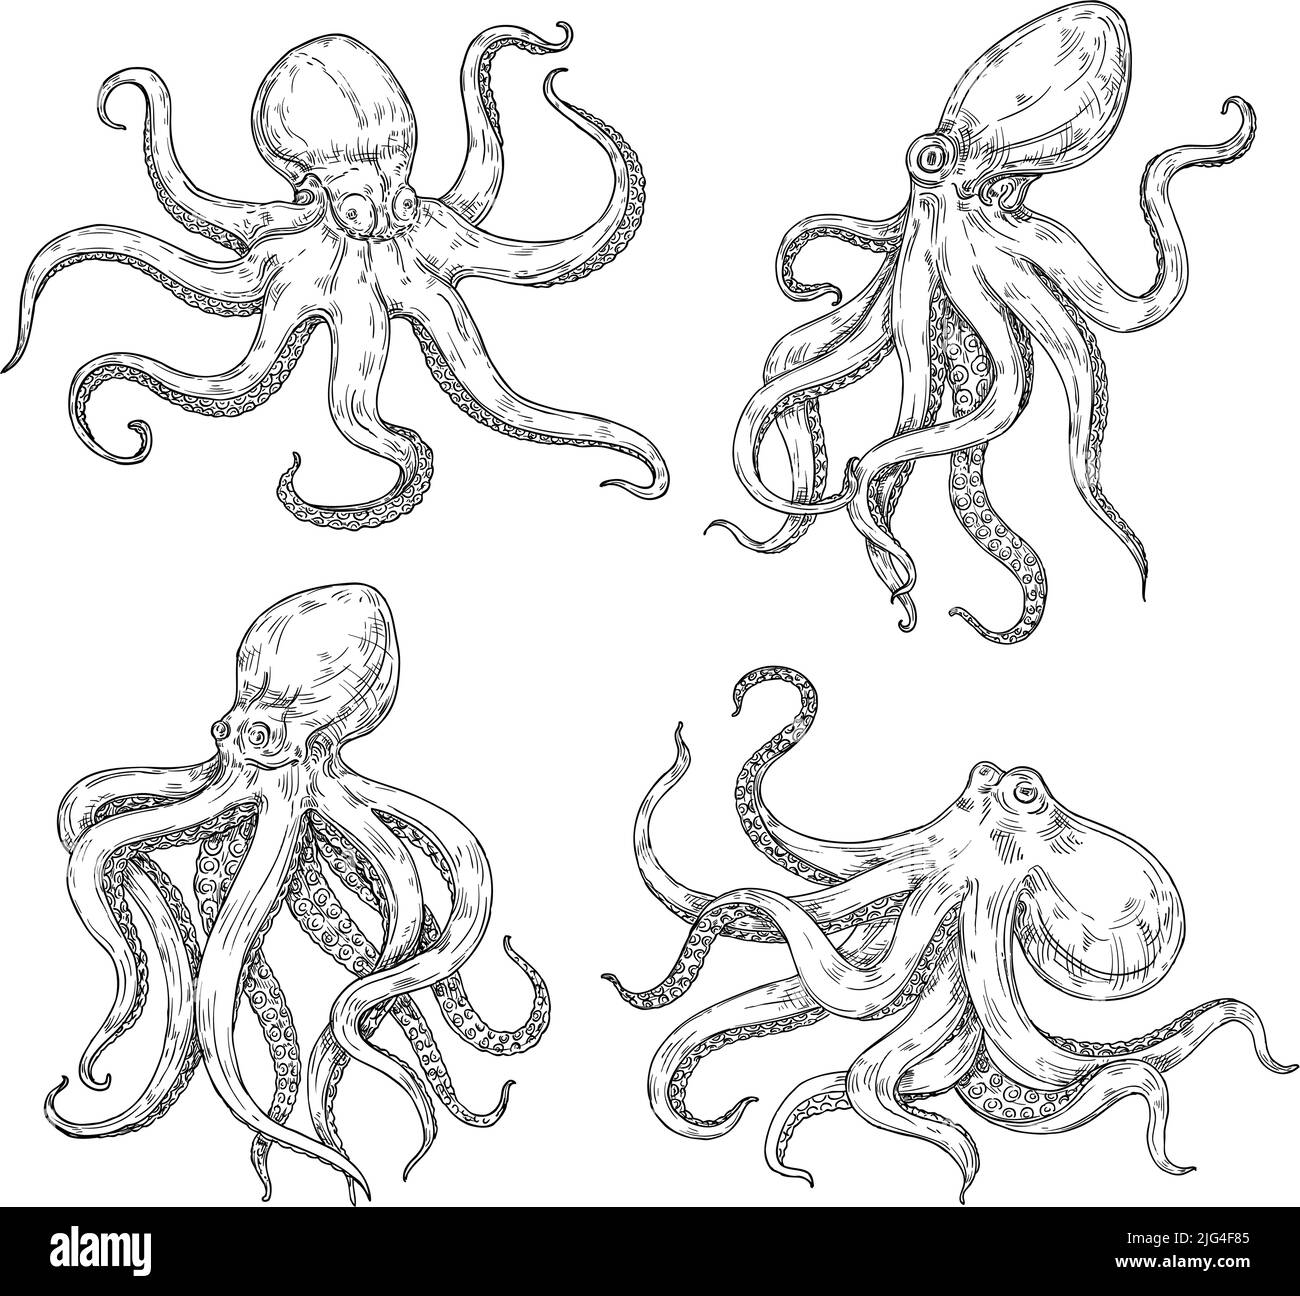 Sketch octopuses. Hand drawn squid animal, octopus with tentacles, underwater creature tattoo vector illustration Stock Vector